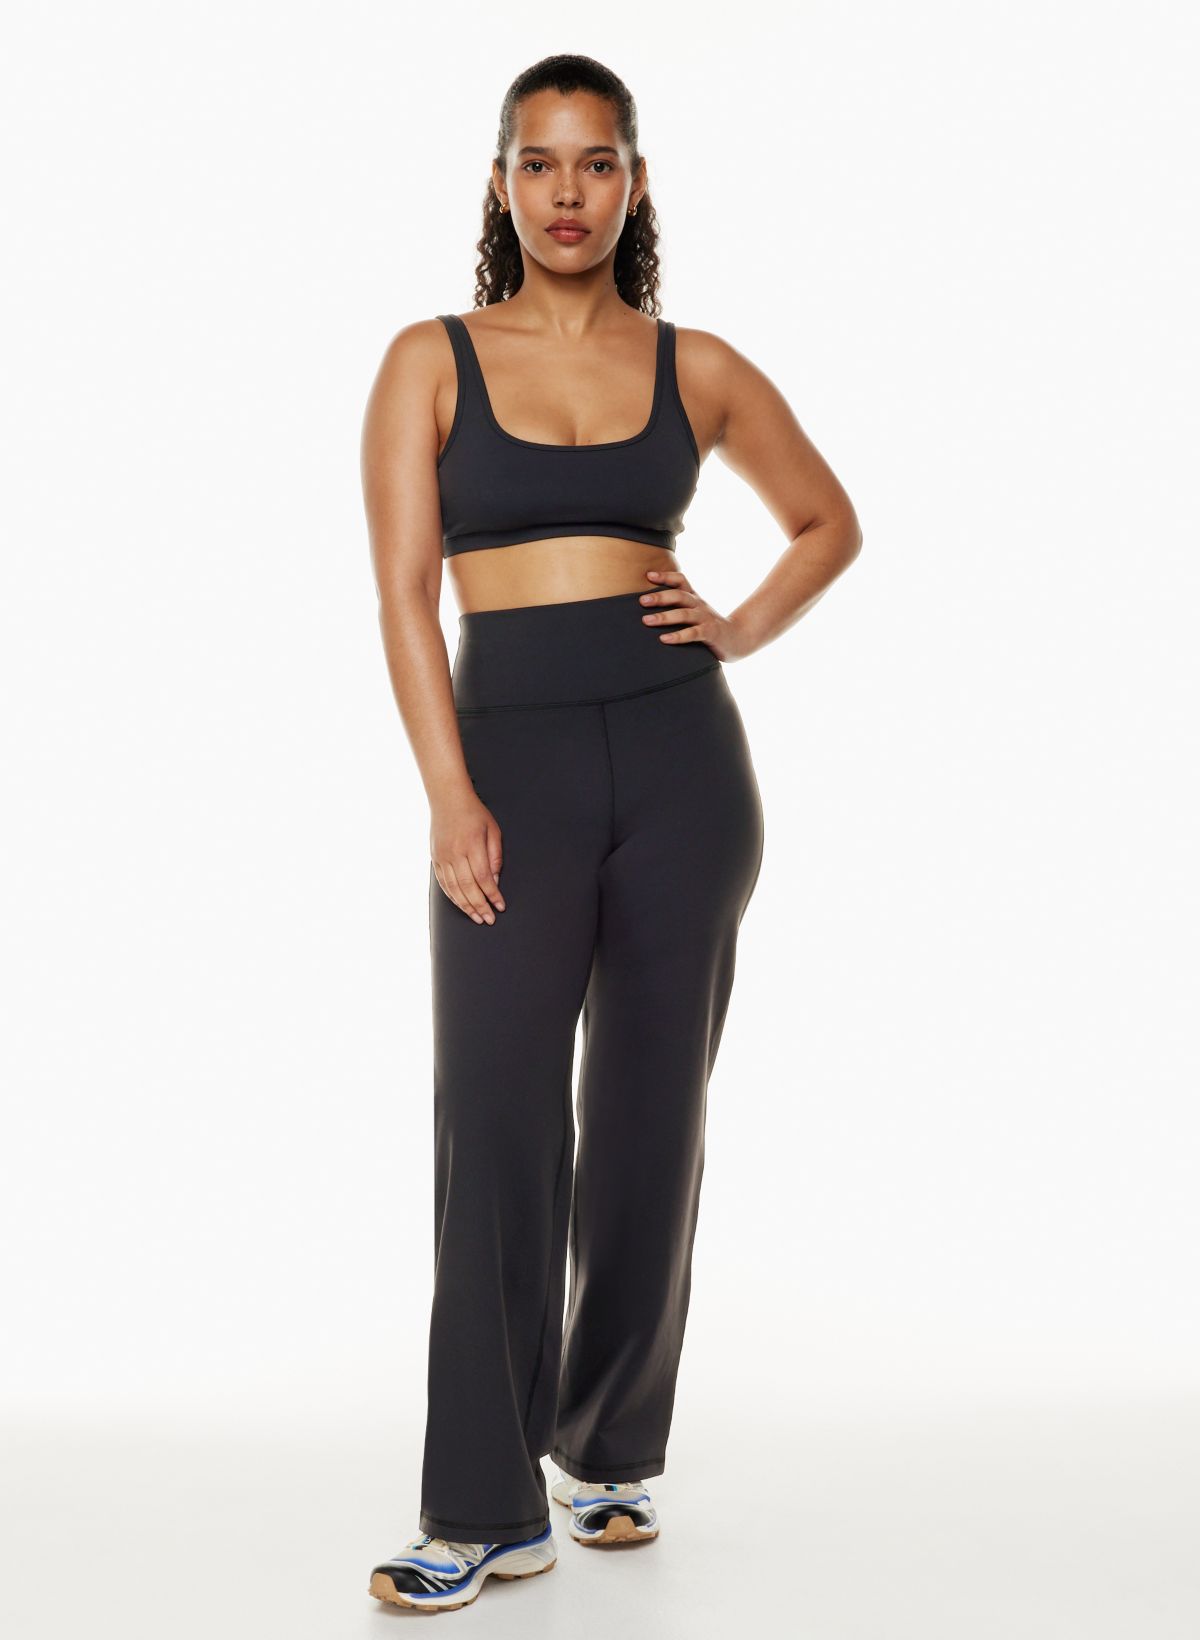 Aritzia Contour Muscle Bodysuit Size Xsmall. - $21 - From sonia